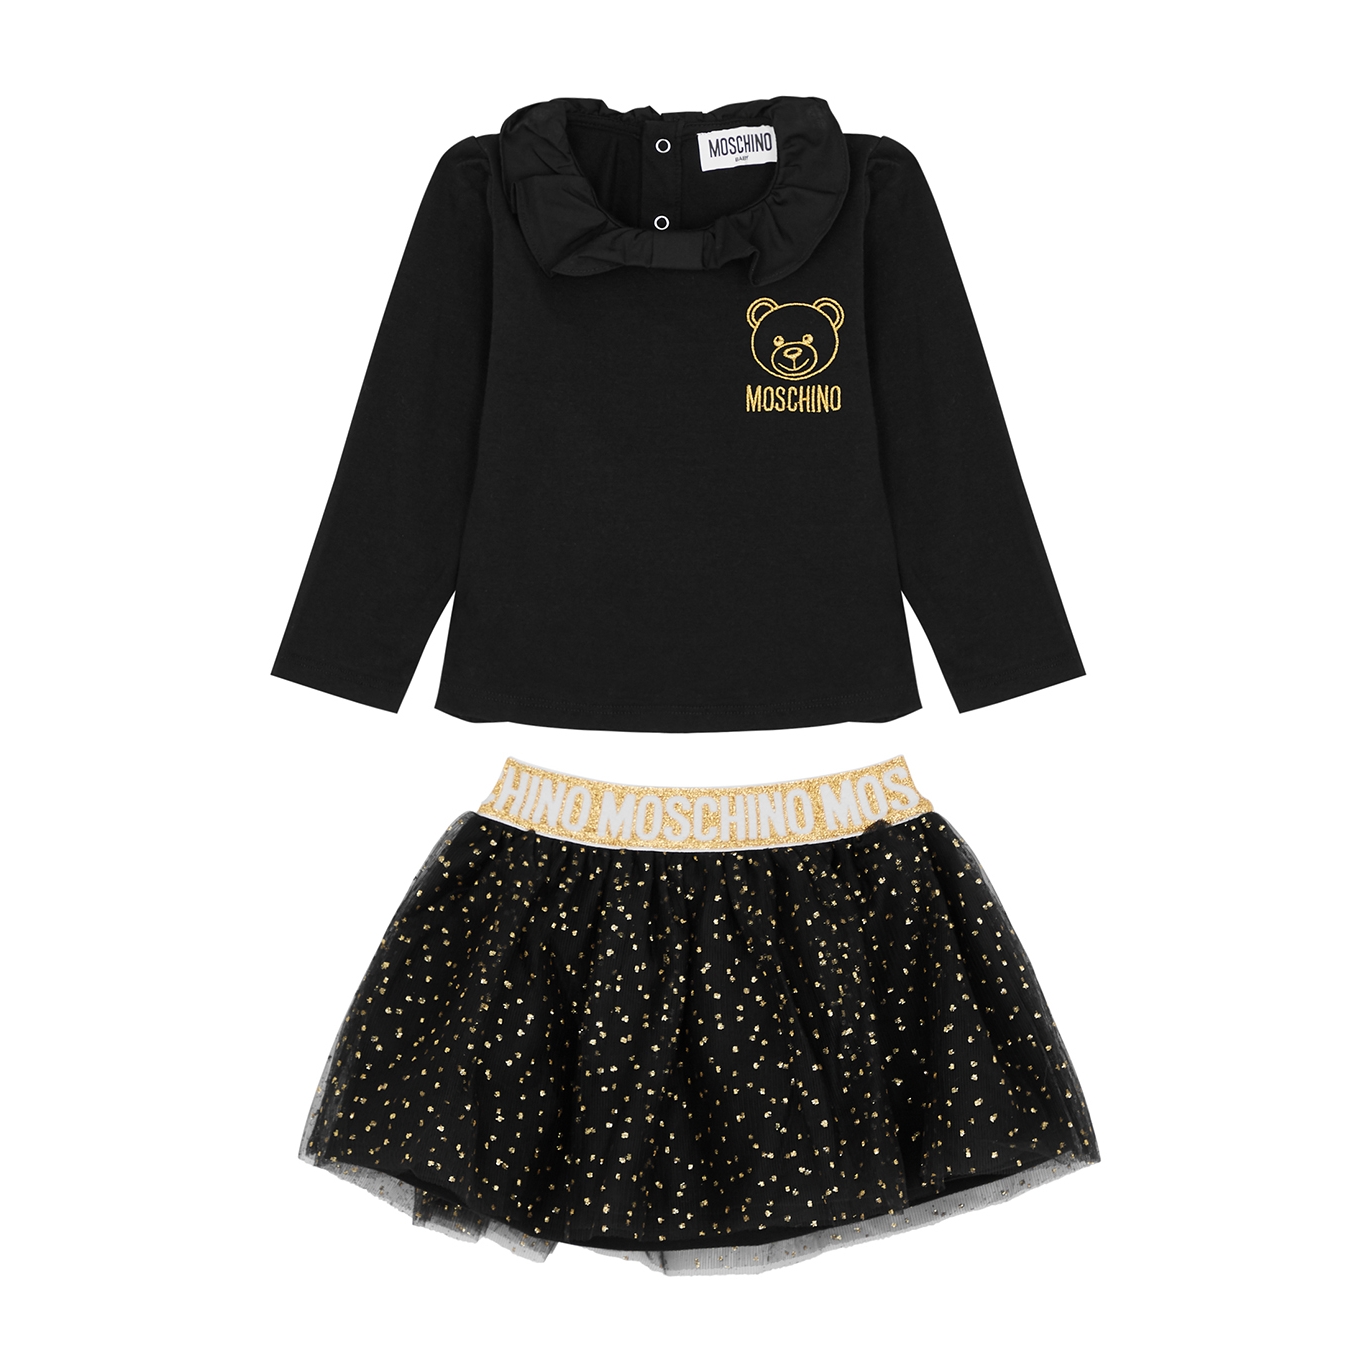 MOSCHINO KIDS Black stretch-cotton top and tulle skirt set - Harvey Nichols